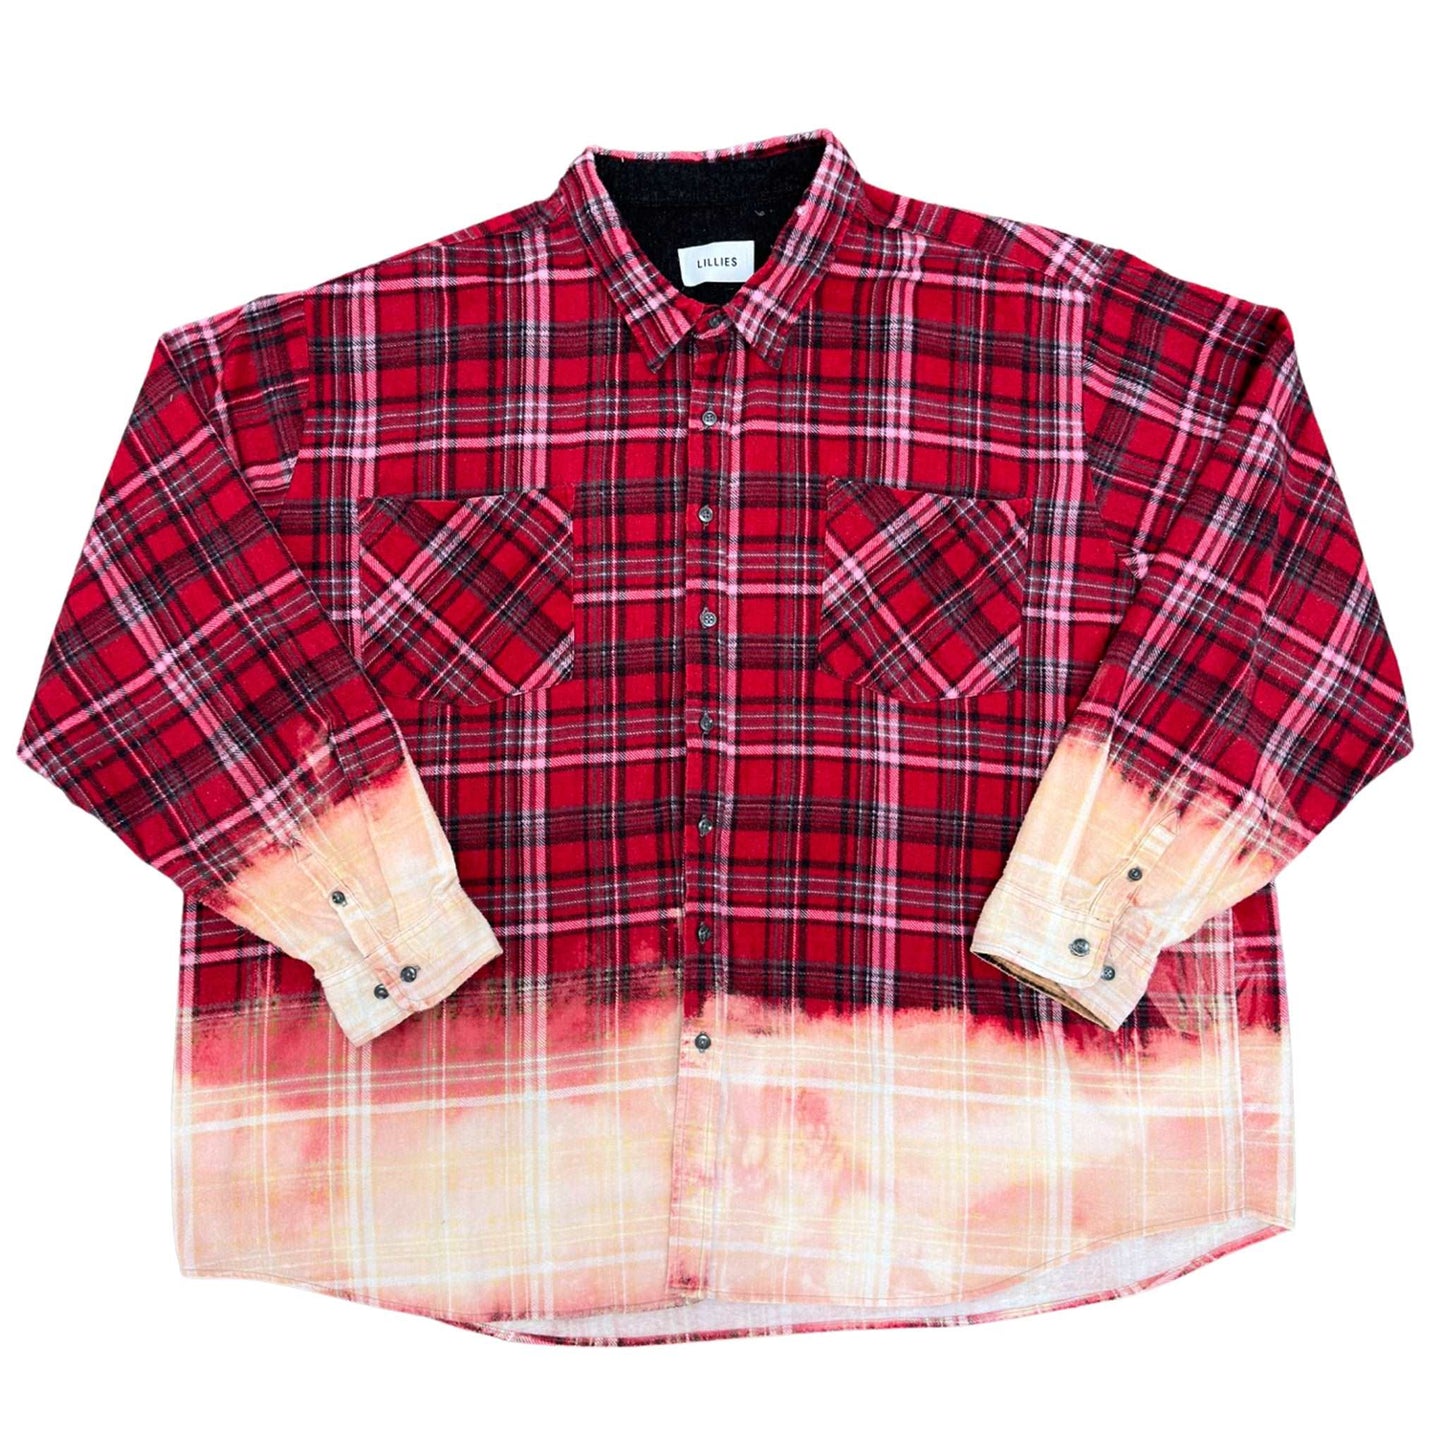 Lillies Studios recycled bleach dyed flannel shirt